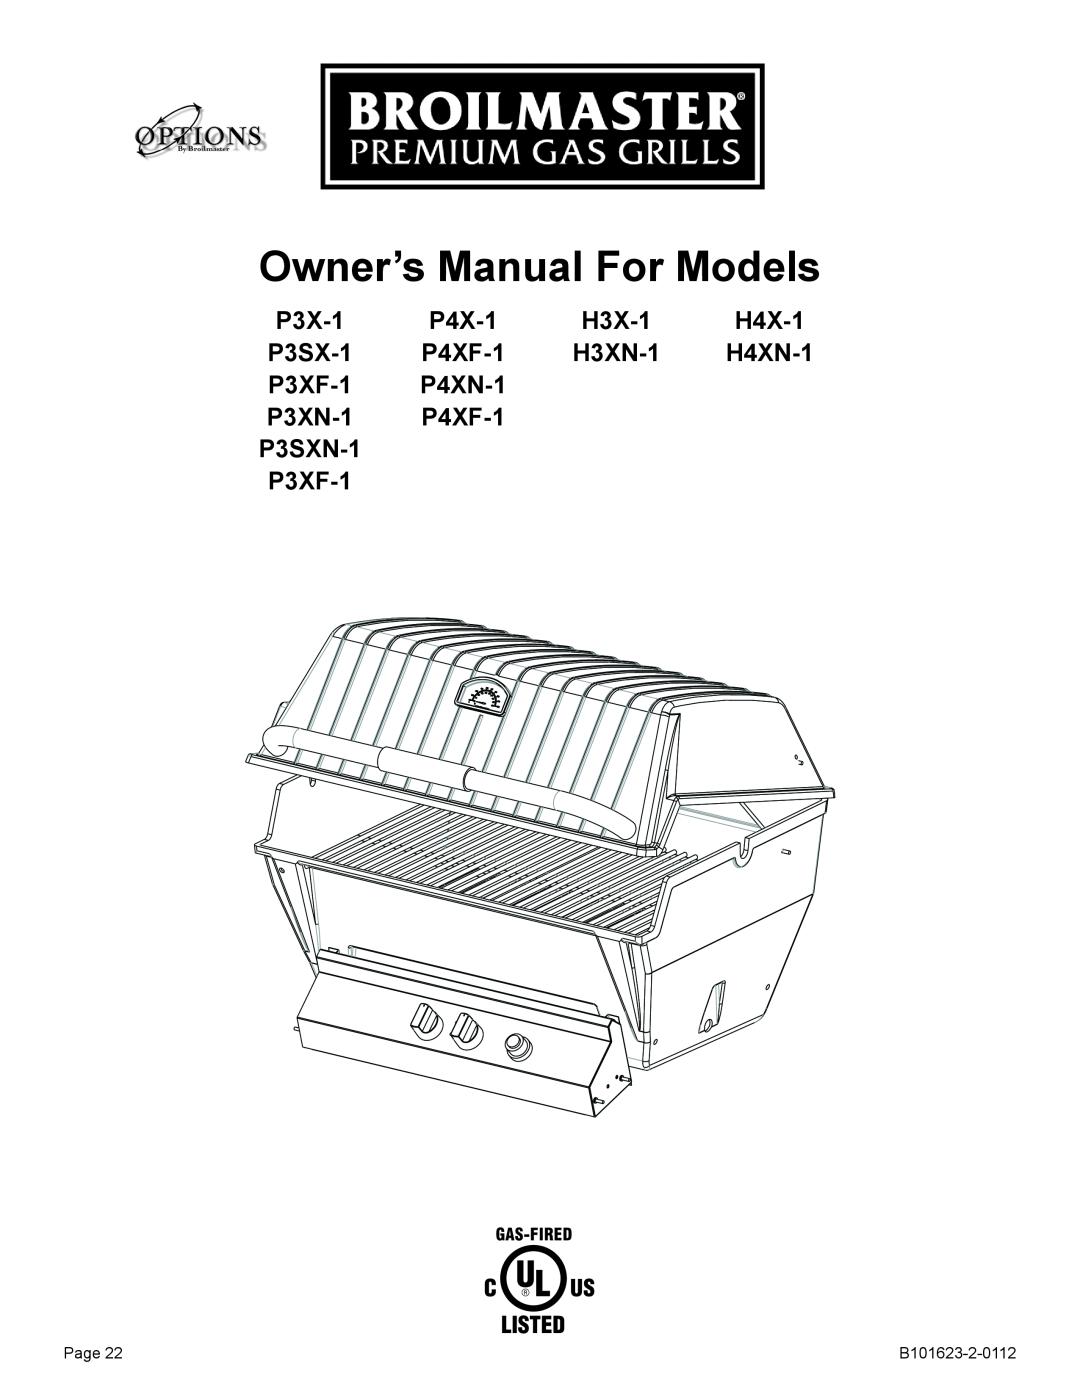 Broilmaster P4XF-1 Owner’s Manual For Models, H4XN-1, P3X-1, P4X-1, H3X-1, H4X-1, P3SX-1, H3XN-1, P3XF-1, P4XN-1, P3XN-1 